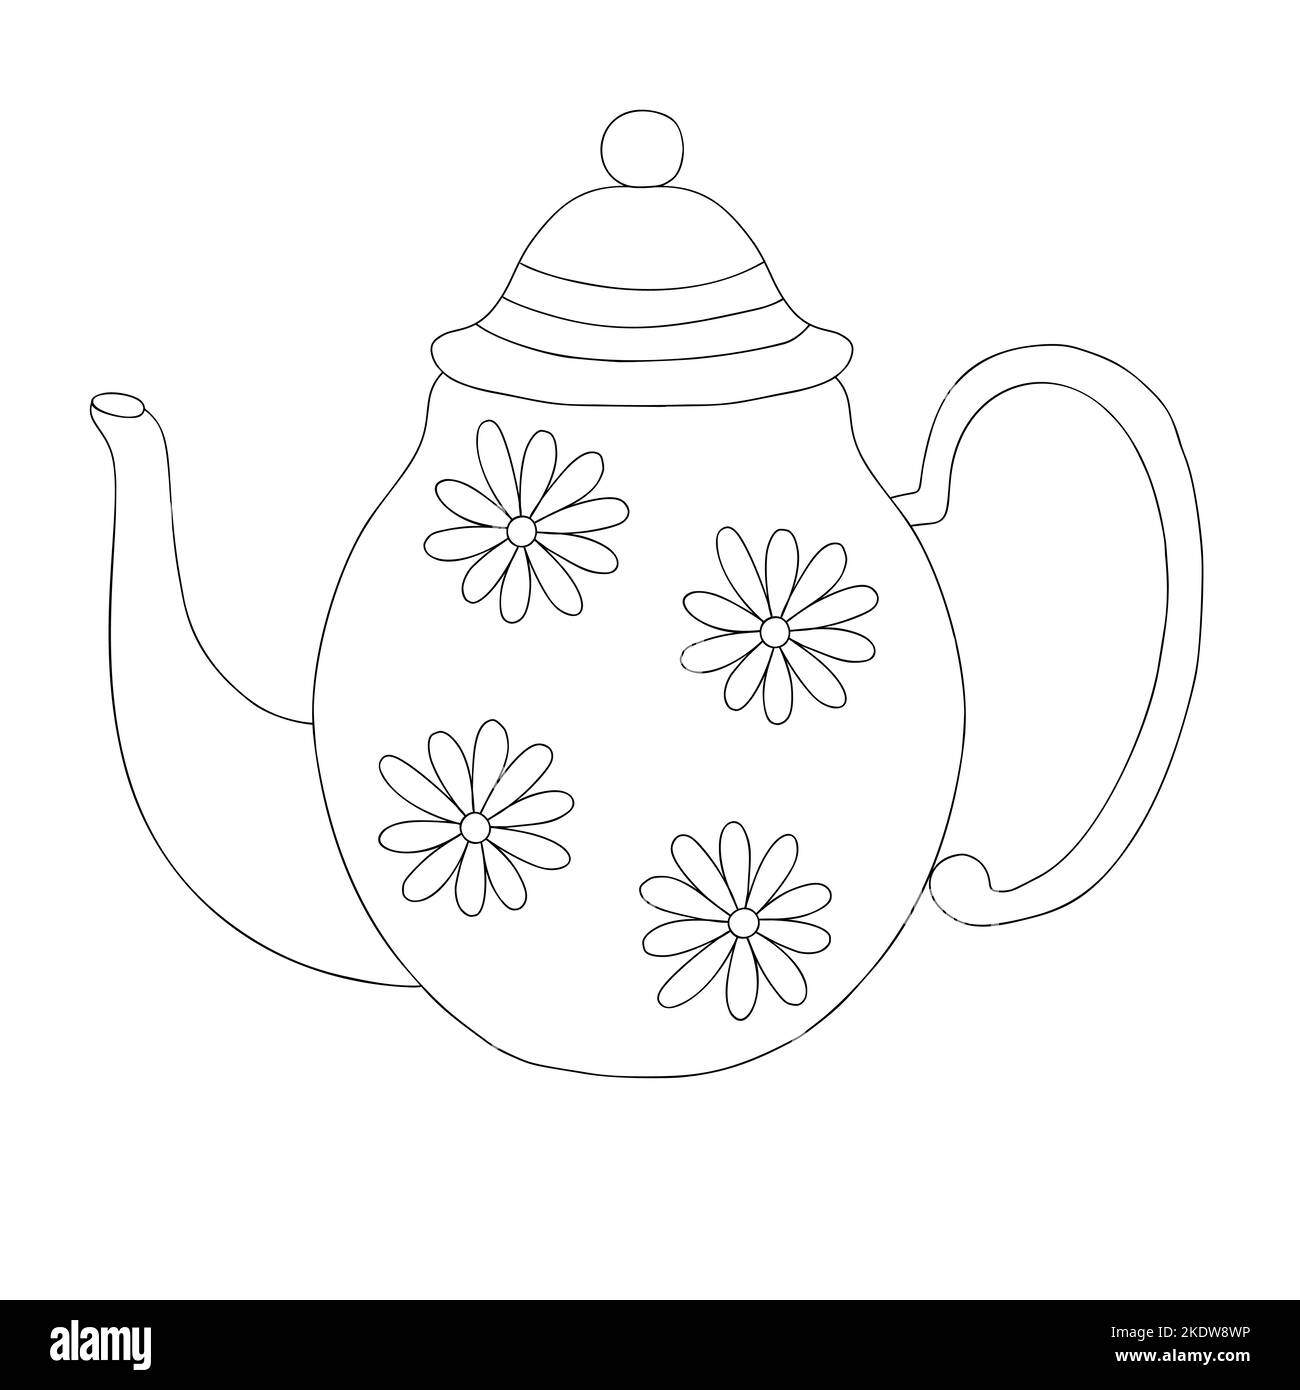 Teapot decorated with flowers simple doodle outline vector illustration, kitchen utensil for making hot drinks tea, coffee, hand drawn design element Stock Vector